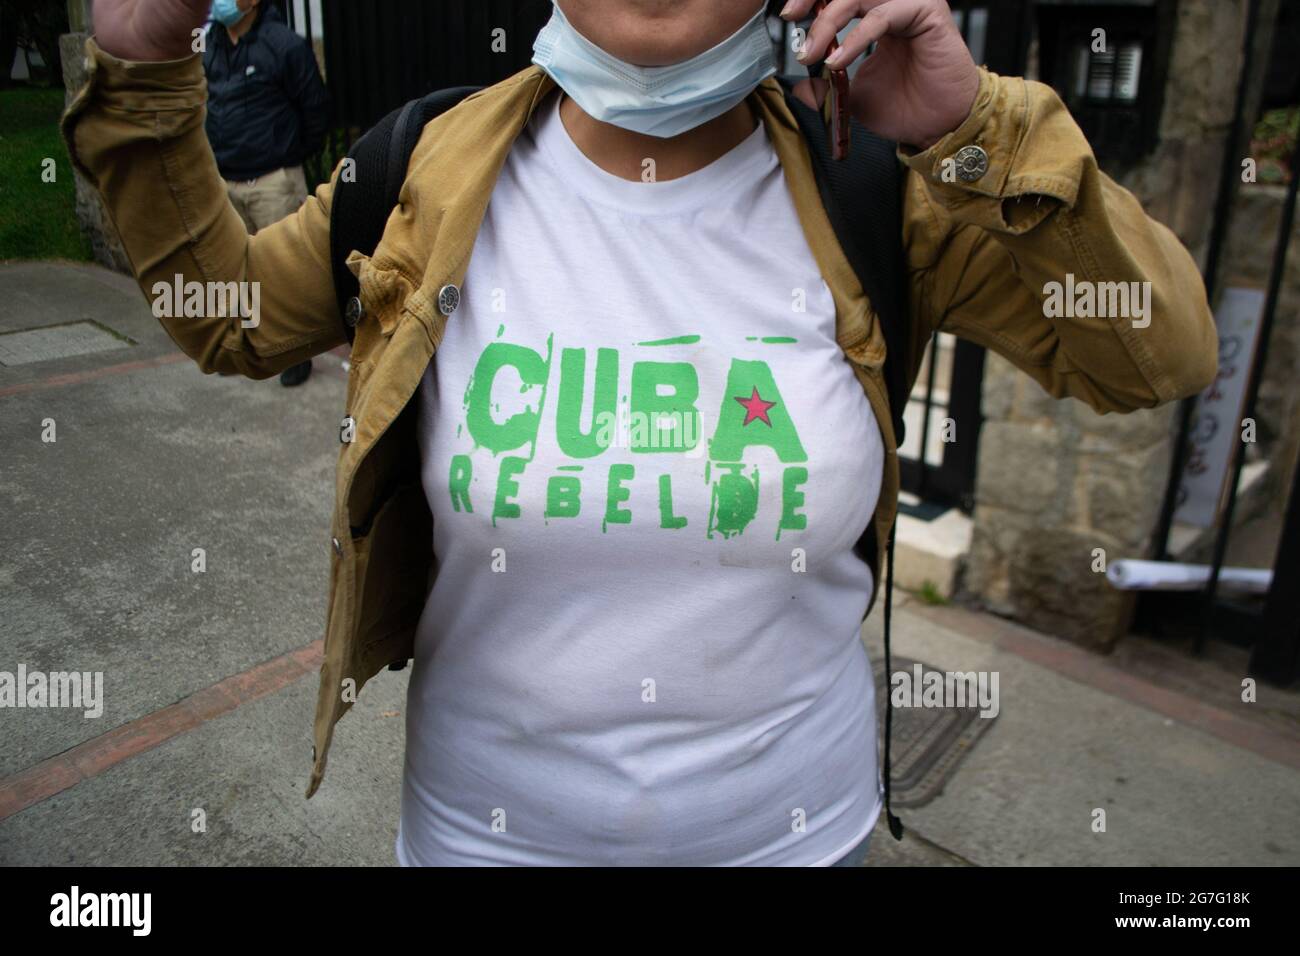 Bogota, Colombia on July 13, 2021, A Cuban resident has a shirt that reads 'Rebel Cuba' as Cuban residents residing in Colombia that protest against the president Miguel Diaz-Cannel protest in Bogota, Colombia on July 13, 2021 after anti-government protest raised in Cuba ended in unrest and violence last sunday July 13 after president Cannel urged supporters to confront protests. Stock Photo